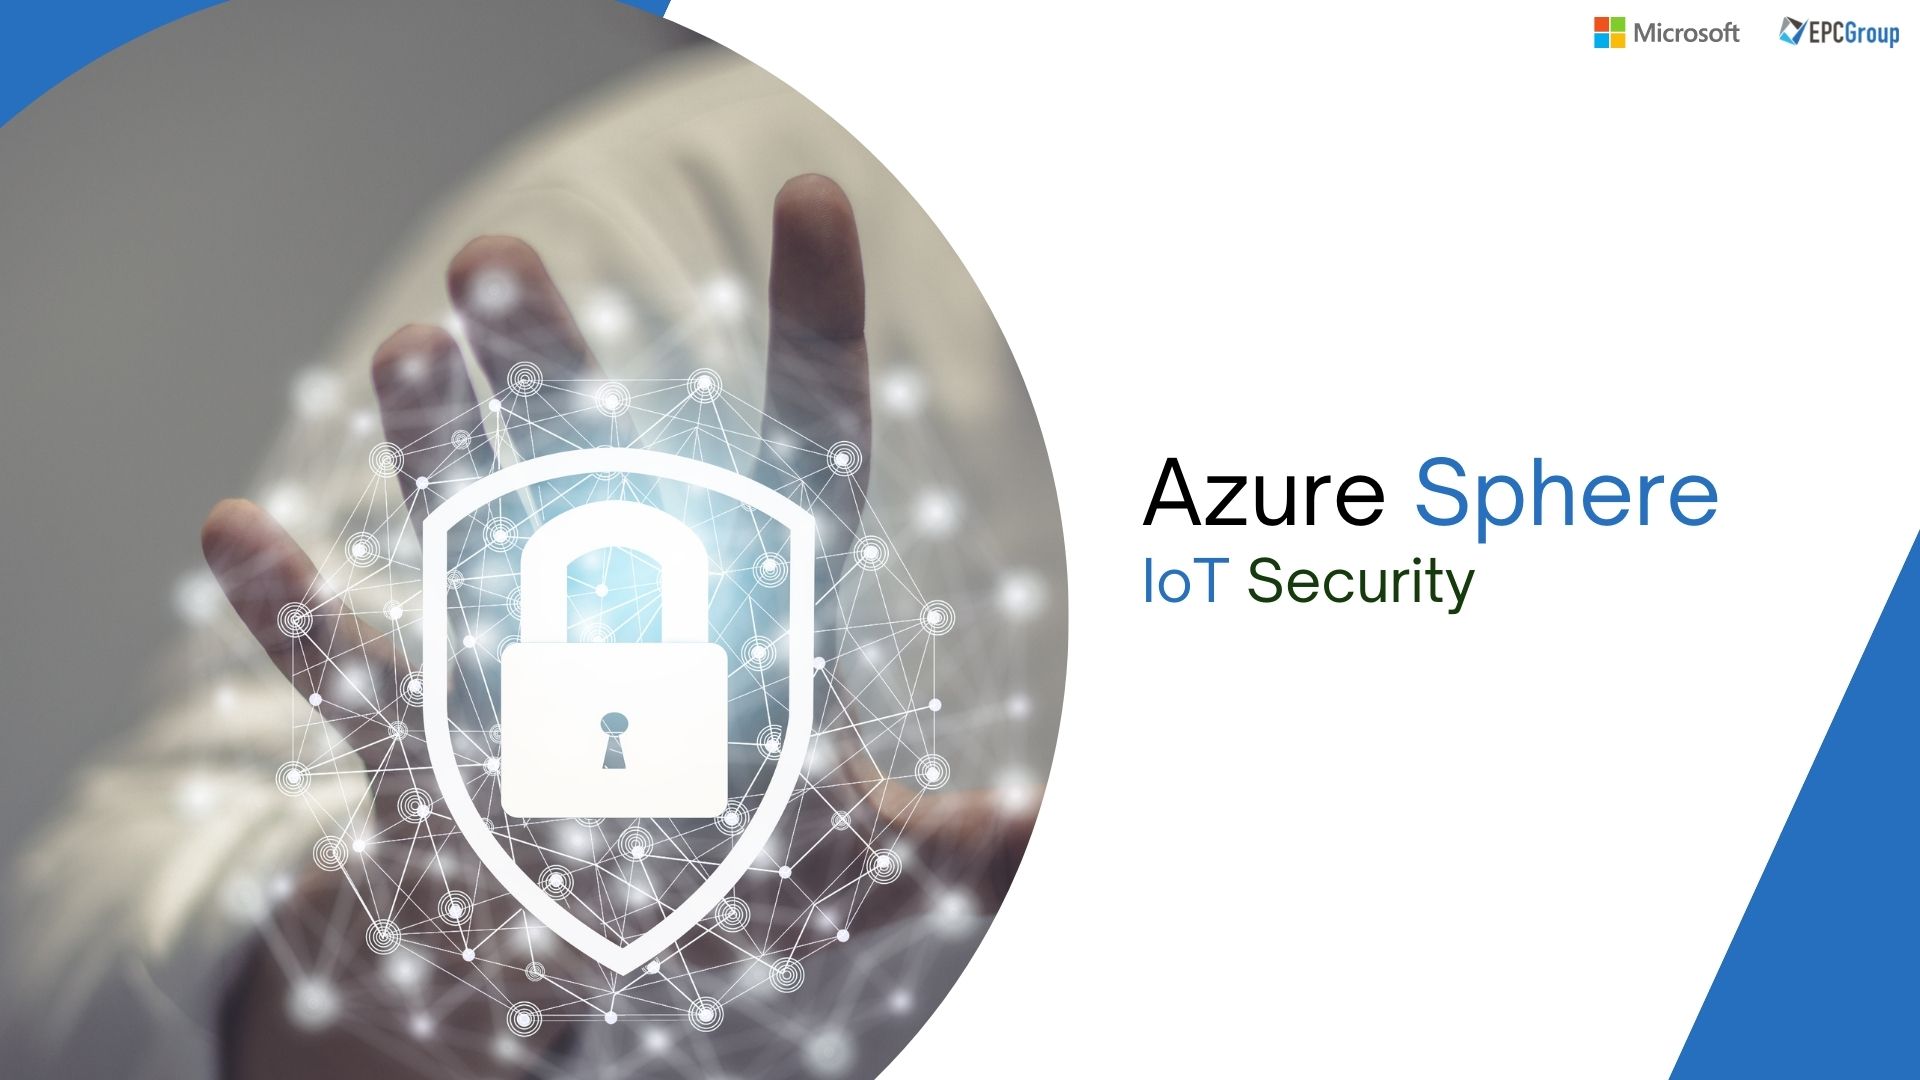 Azure Sphere Pricing And Features Guide: Security For Internet-Connected IoT Devices